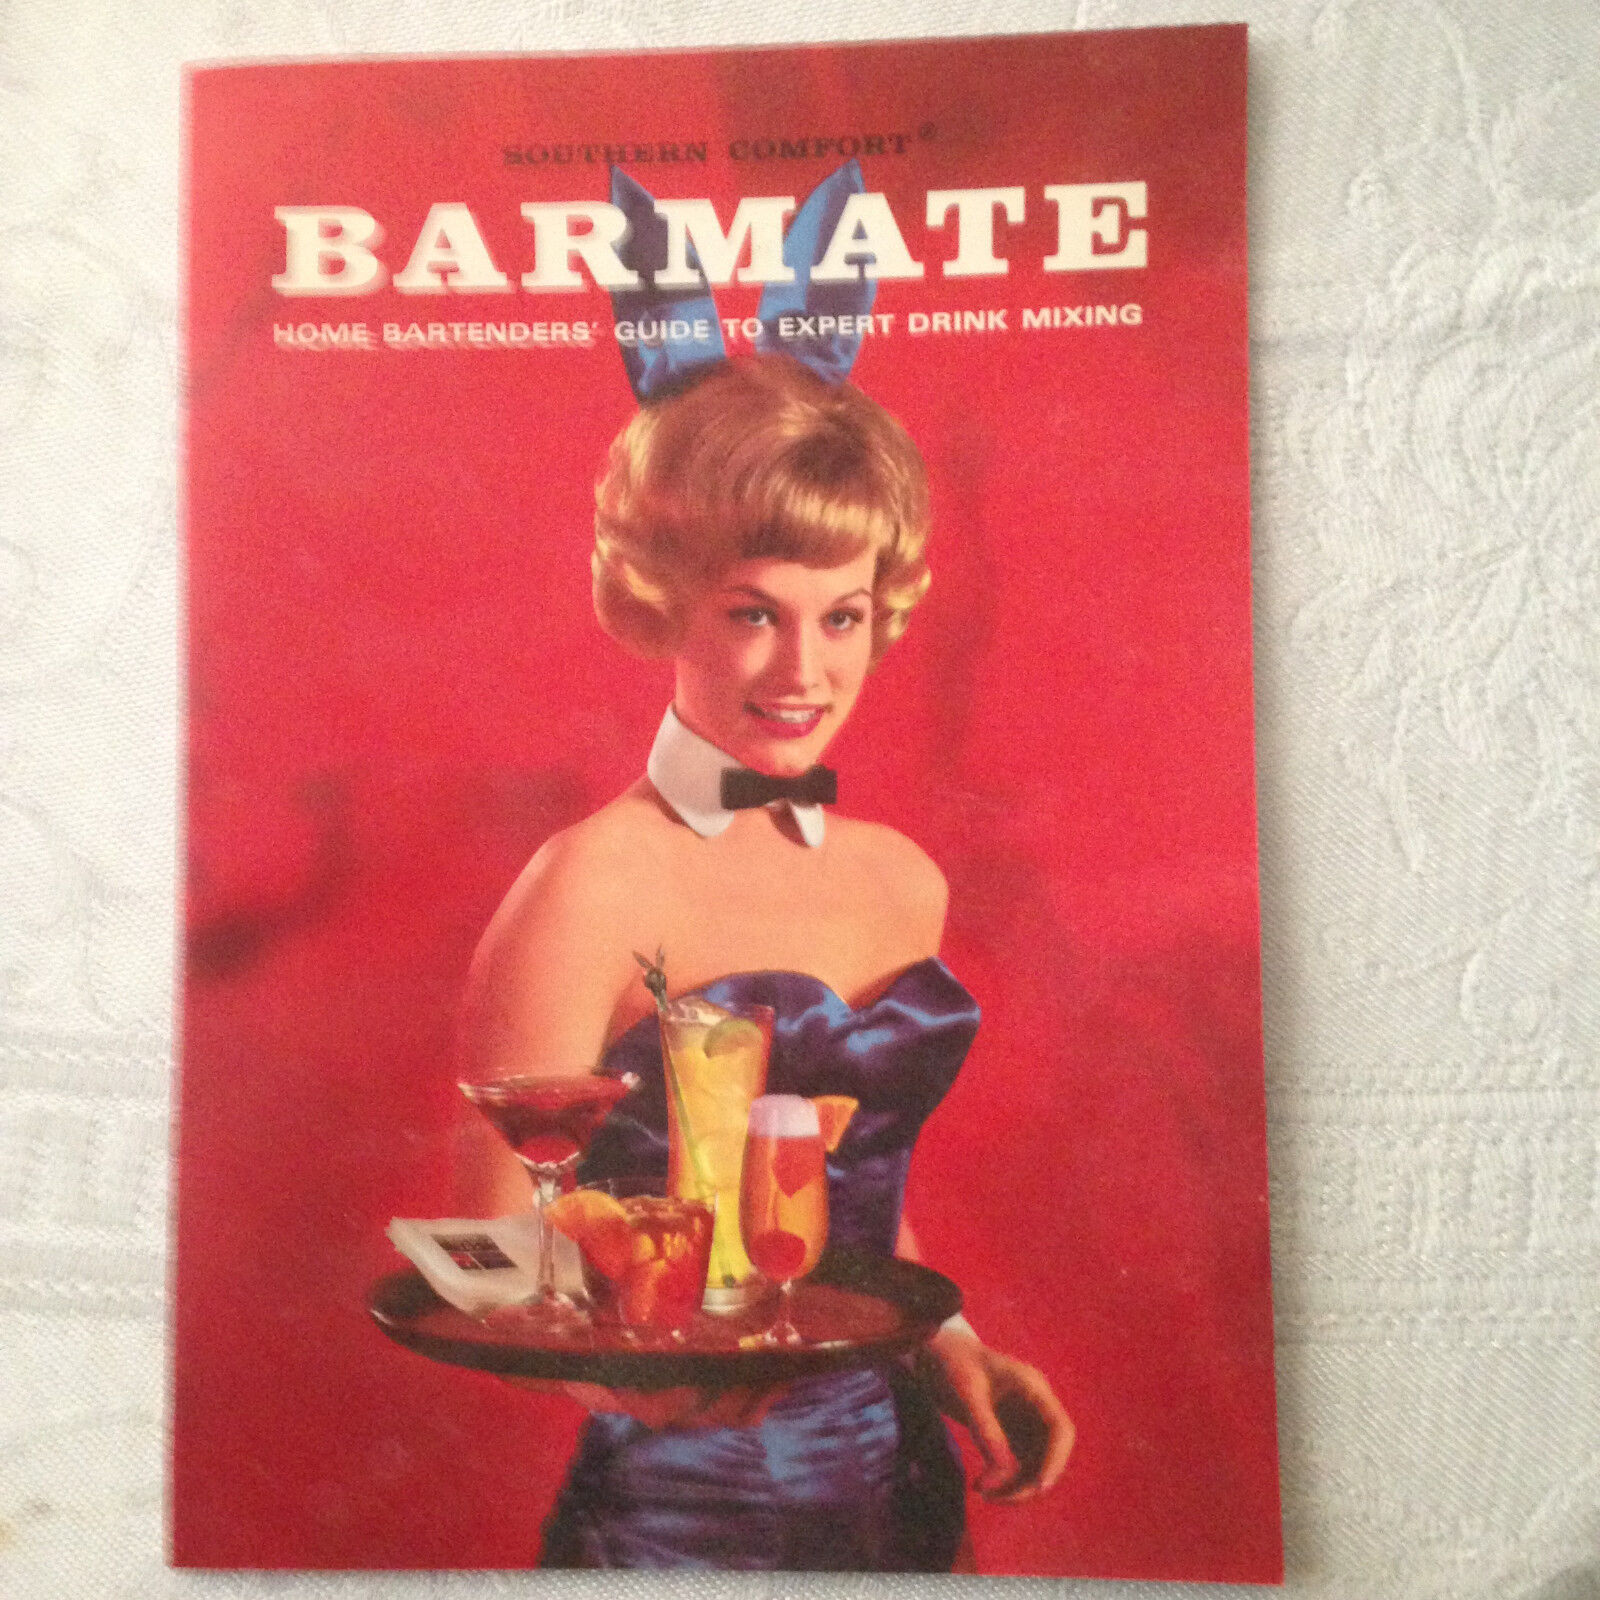 BARMATE 1964 HOME BARTENDERS GUIDE TO DRINK MIXING MINT PLAYBOY BUNNY VINTAGE AD